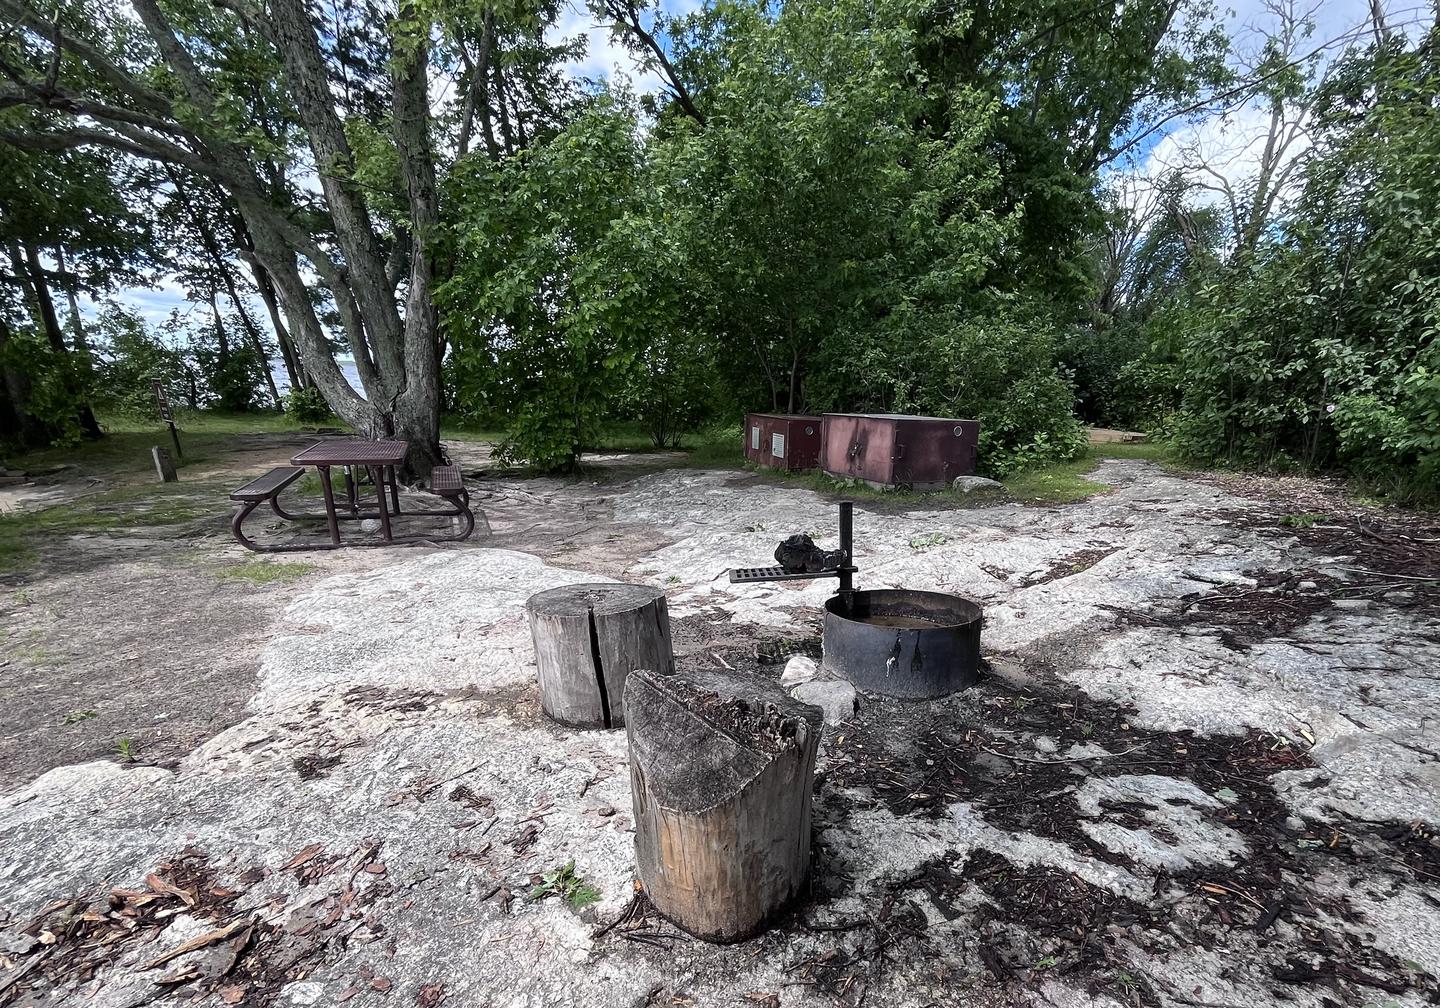 K21 - Maple Point, view into the campsite core of the fire ring, bear lockers, and picnic table with a couple of logs for seating in the foreground and the mooring post and campsite sign in the background. View into campsite core